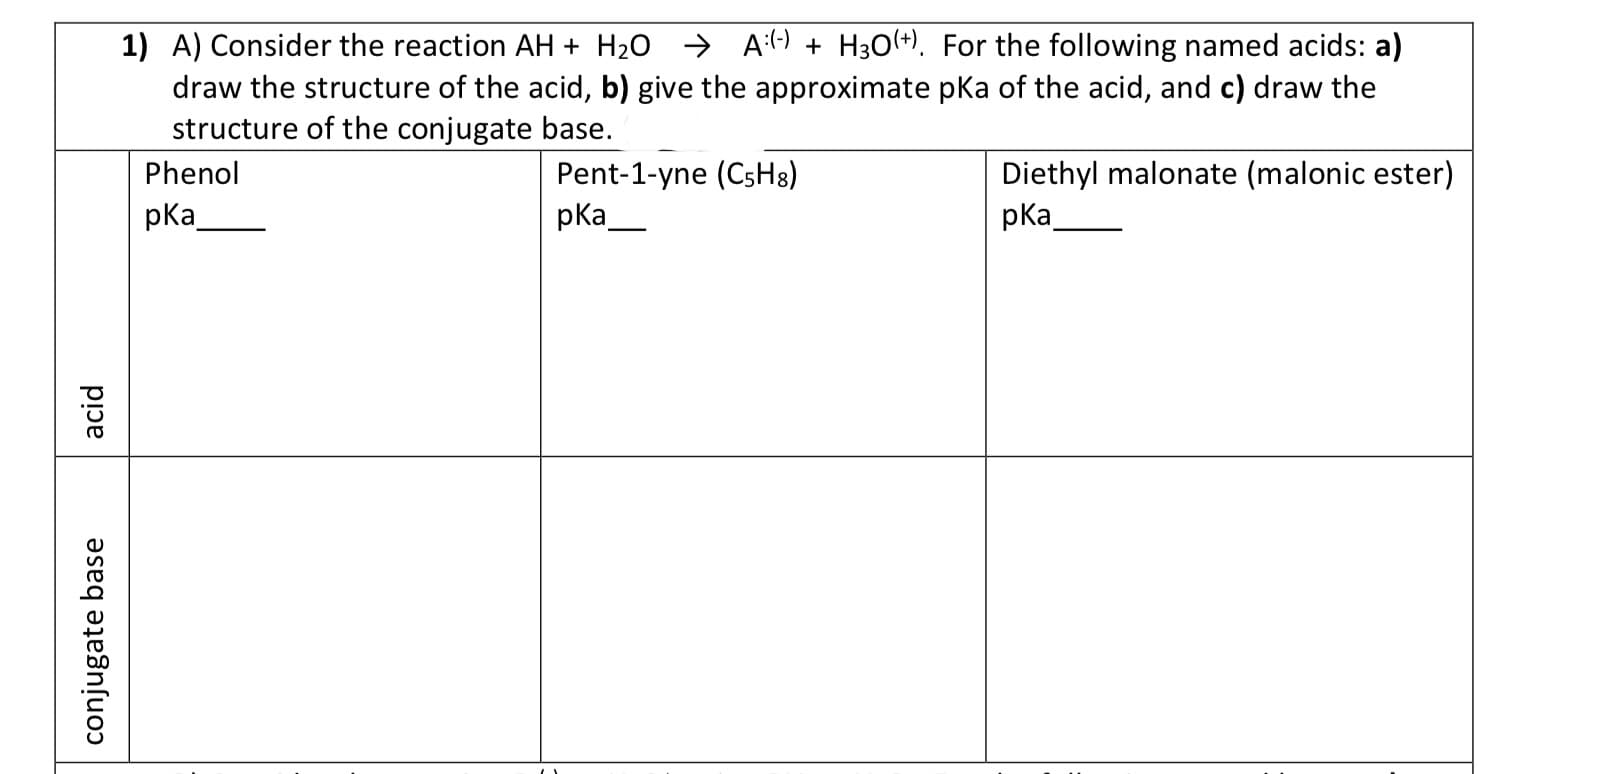 1) A) Consider the reaction AH + H2O → A(-) + H3O(+). For the following named acids: a)
draw the structure of the acid, b) give the approximate pka of the acid, and c) draw the
structure of the conjugate base.
Pent-1-yne (CSH8)
pKa-
Diethyl malonate (malonic ester)
pka
Phenol
pka
